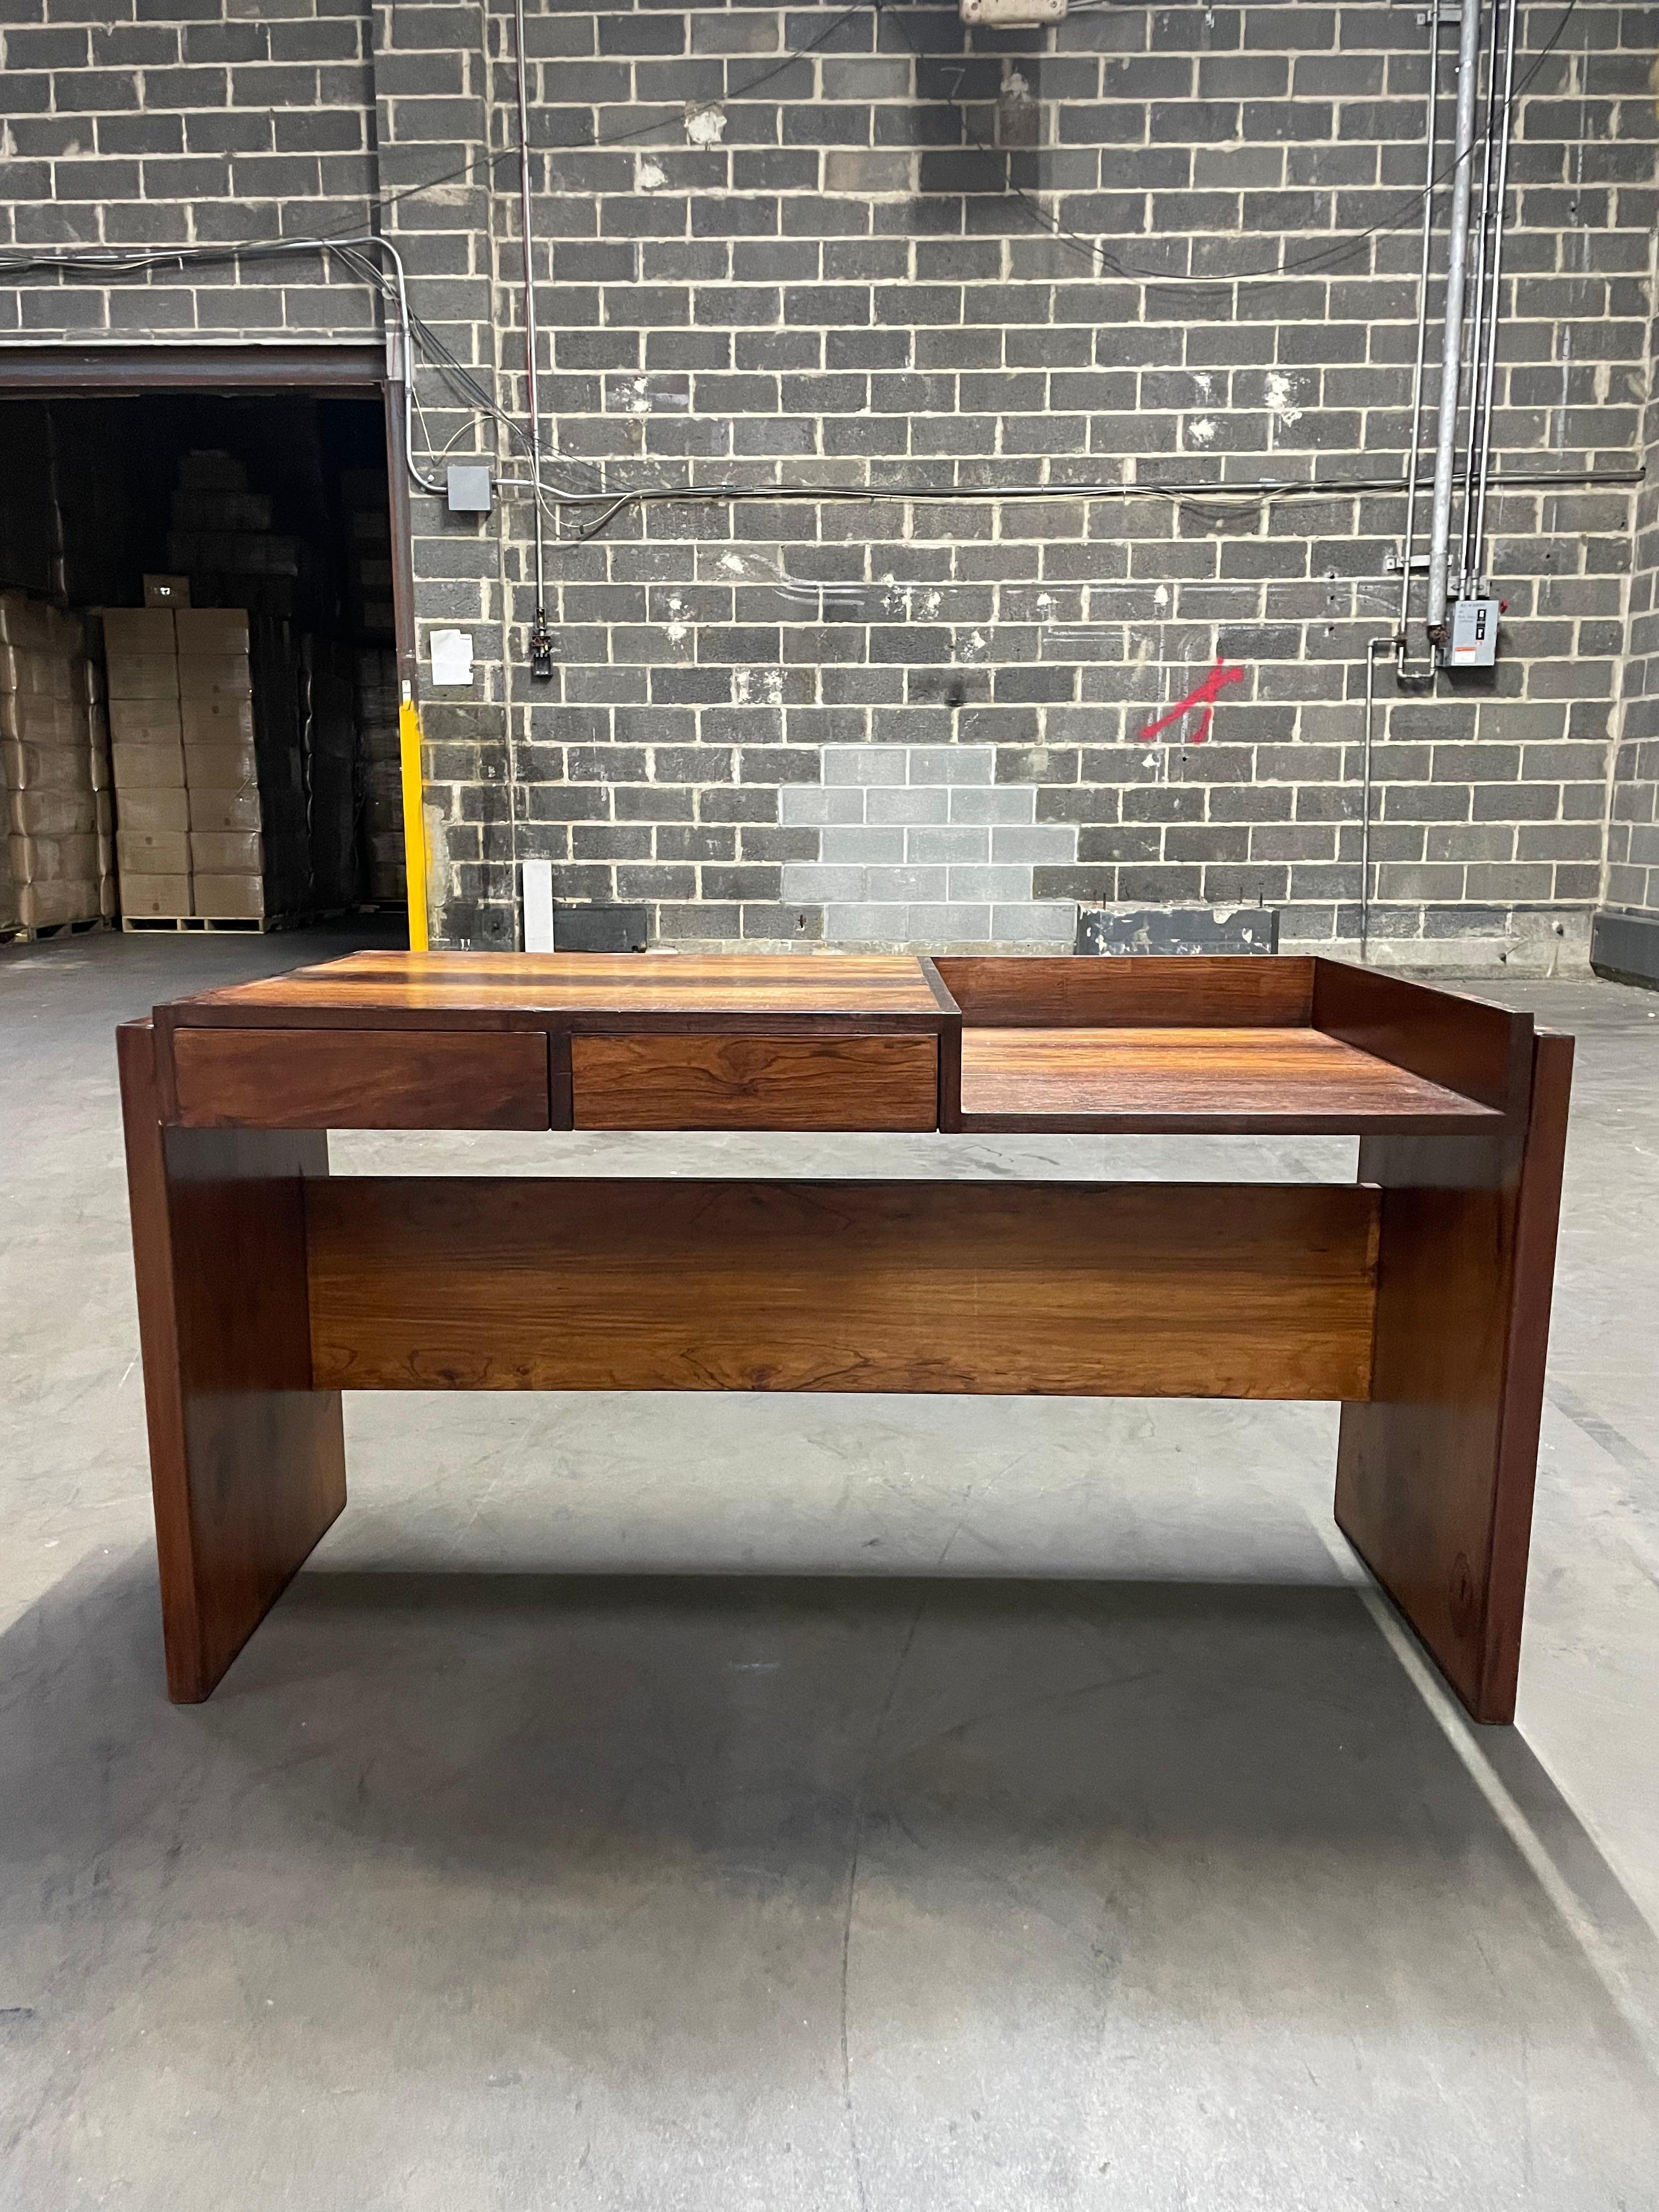 Available today, this Midcentury Modern Desk in Brazilian Rosewood, known as Jacaranda designed by Joaquim Tenreiro for Bloch Editores in the 1966 is nothing less than spectacular.

This desk is made in solid wood and wood veneer with two drawers